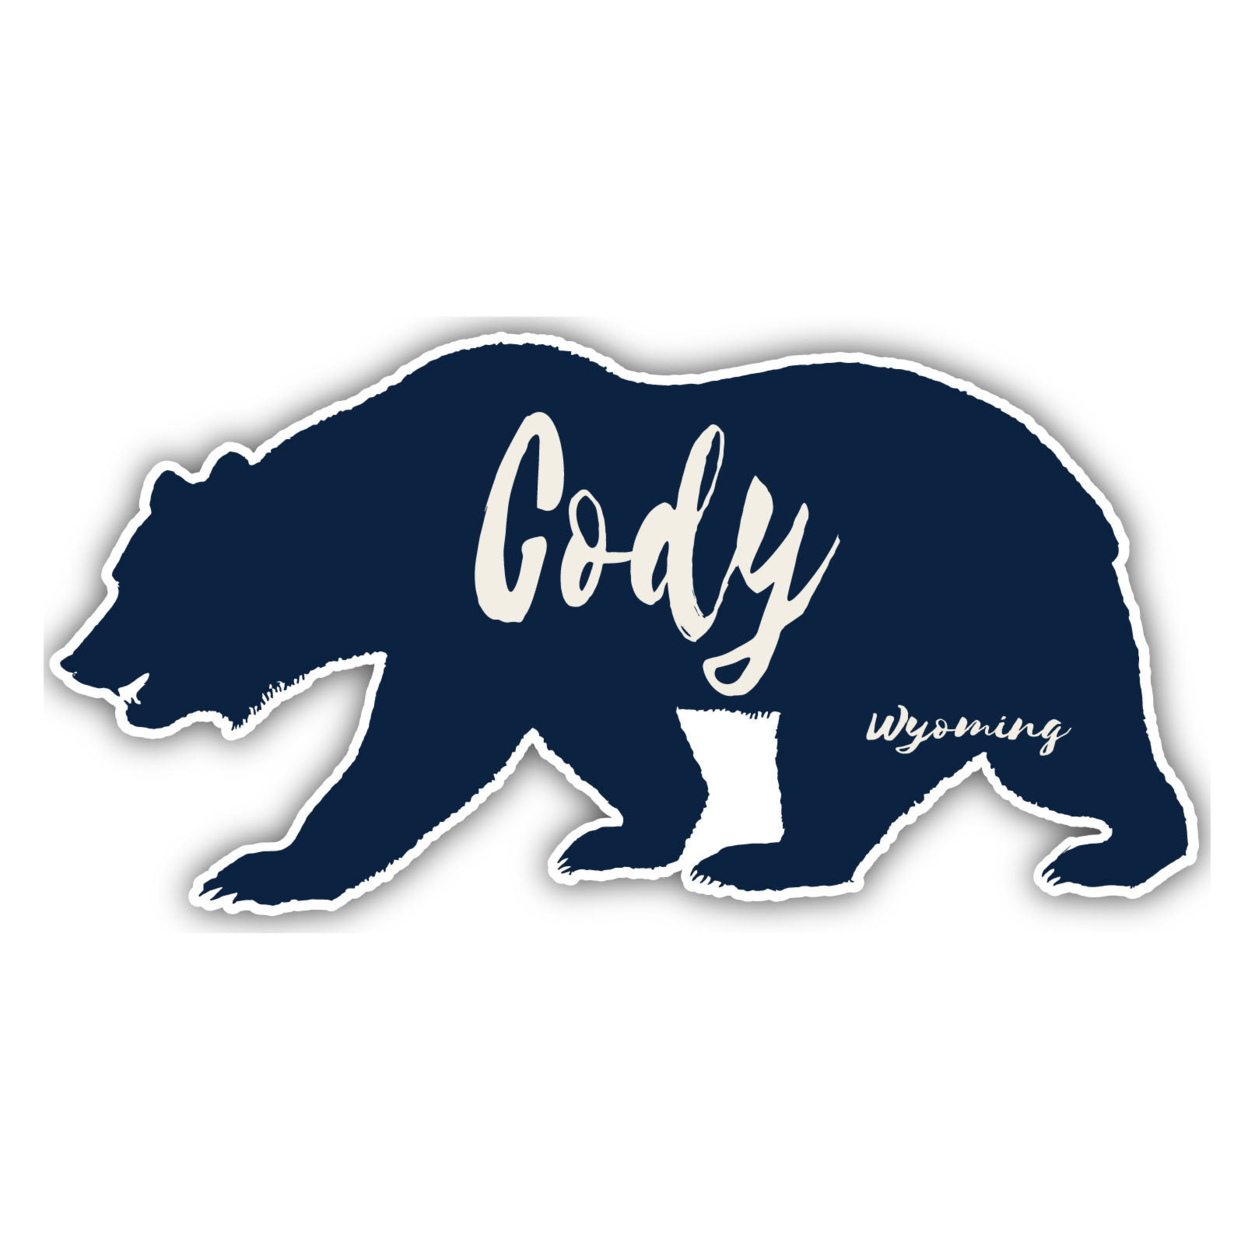 Cody Wyoming Souvenir Decorative Stickers (Choose Theme And Size) - Single Unit, 8-Inch, Bear